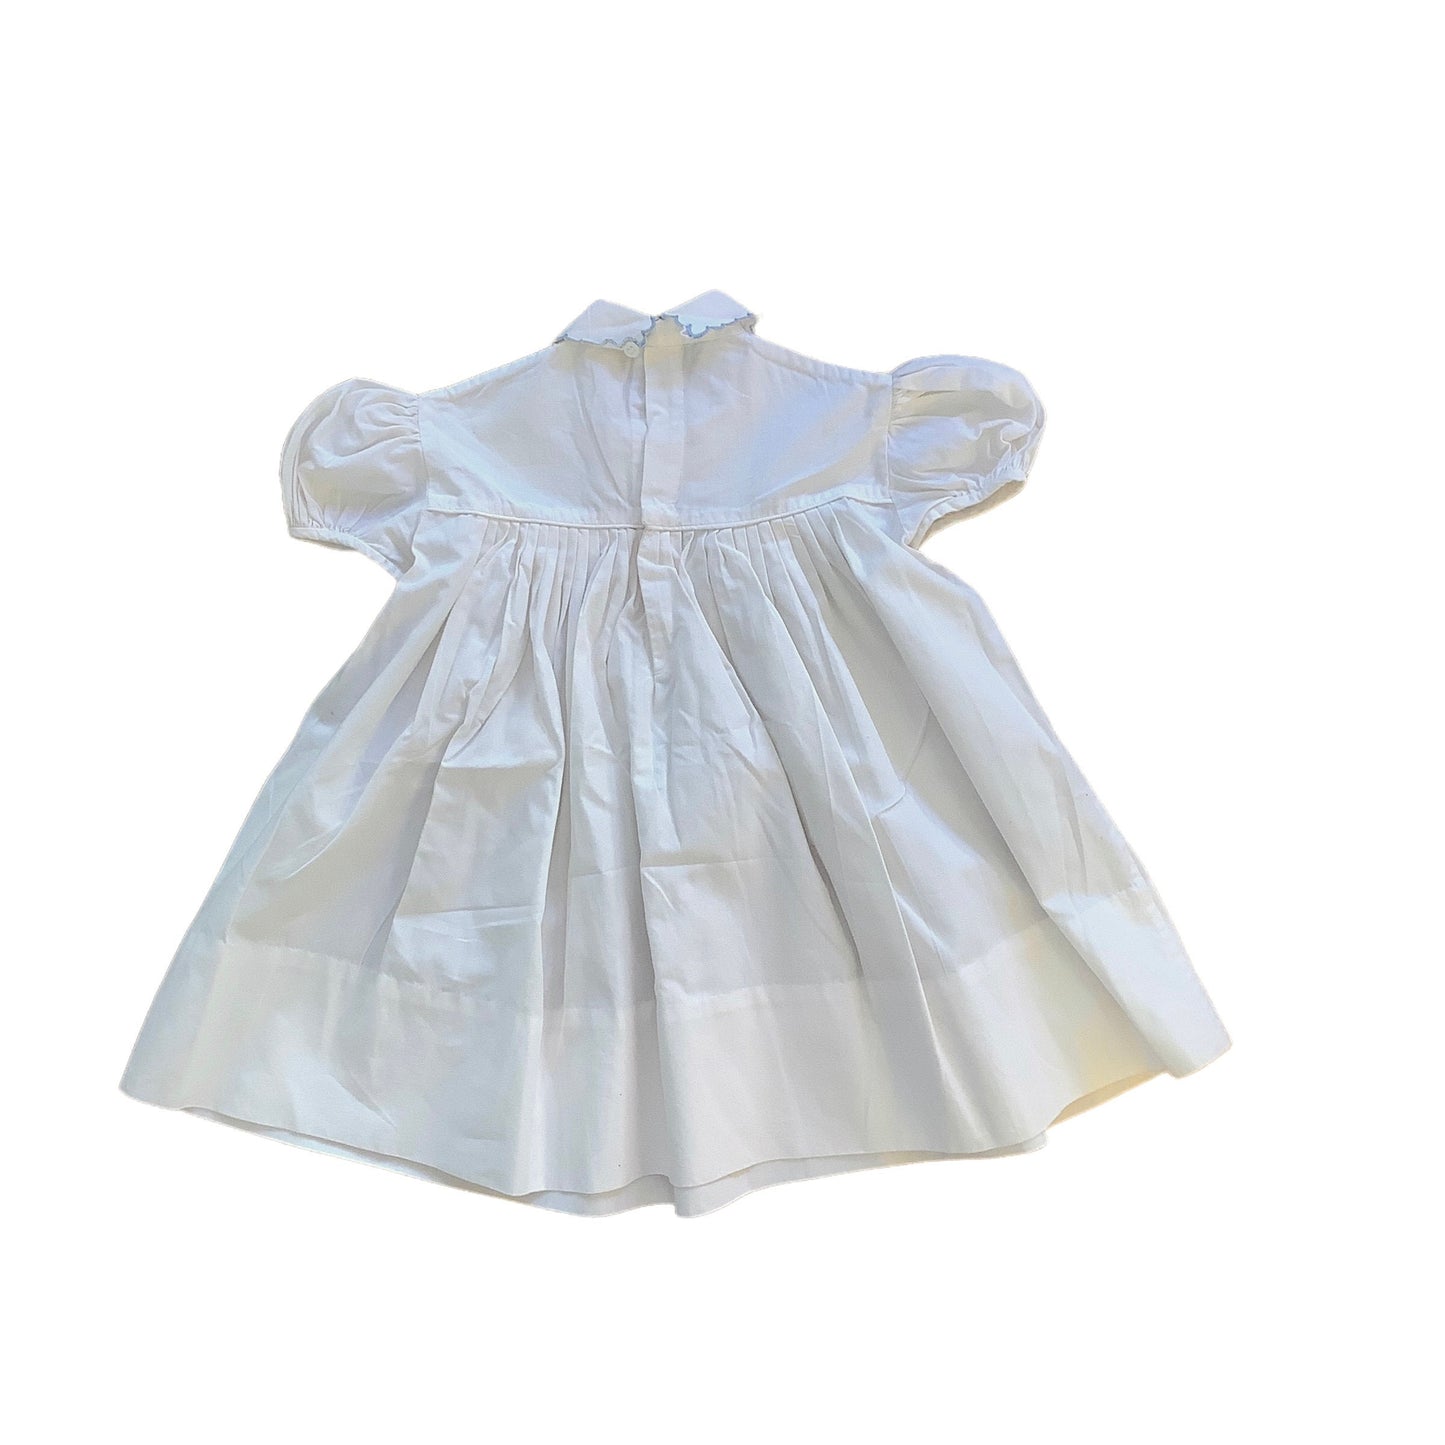 1960s  Delicately Embroidered White Cotton  Dress / 9-12 Months